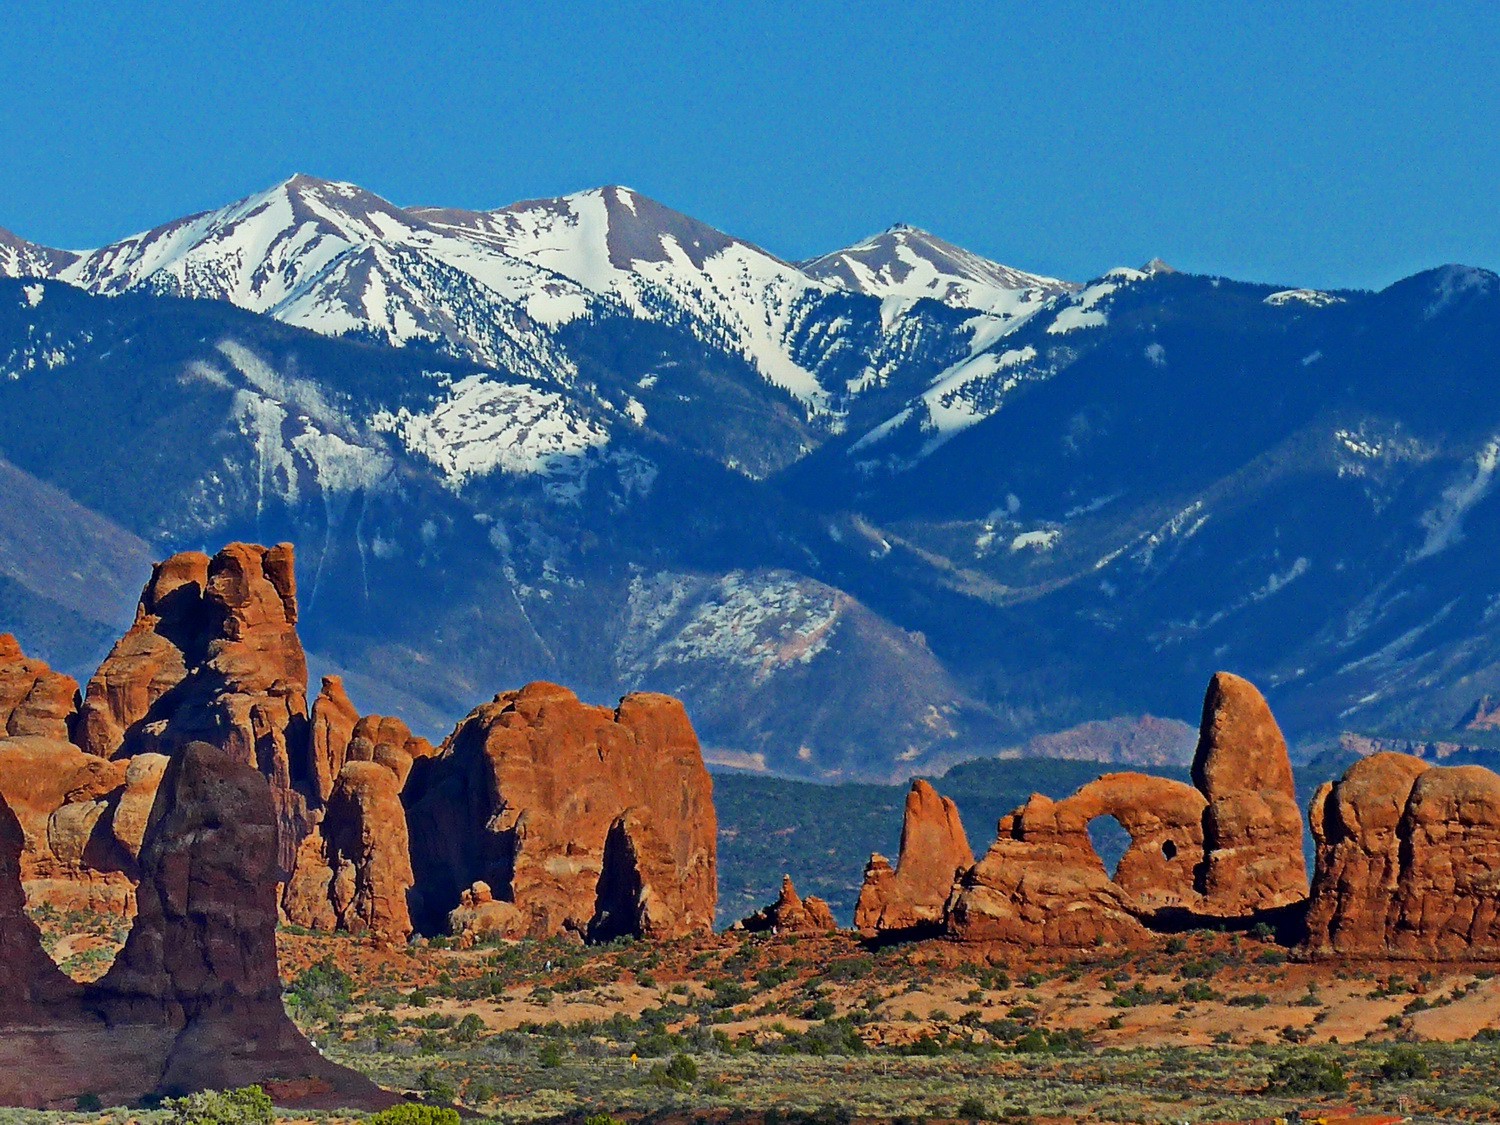 In the Arches National Park with Manti-la Sal mountains